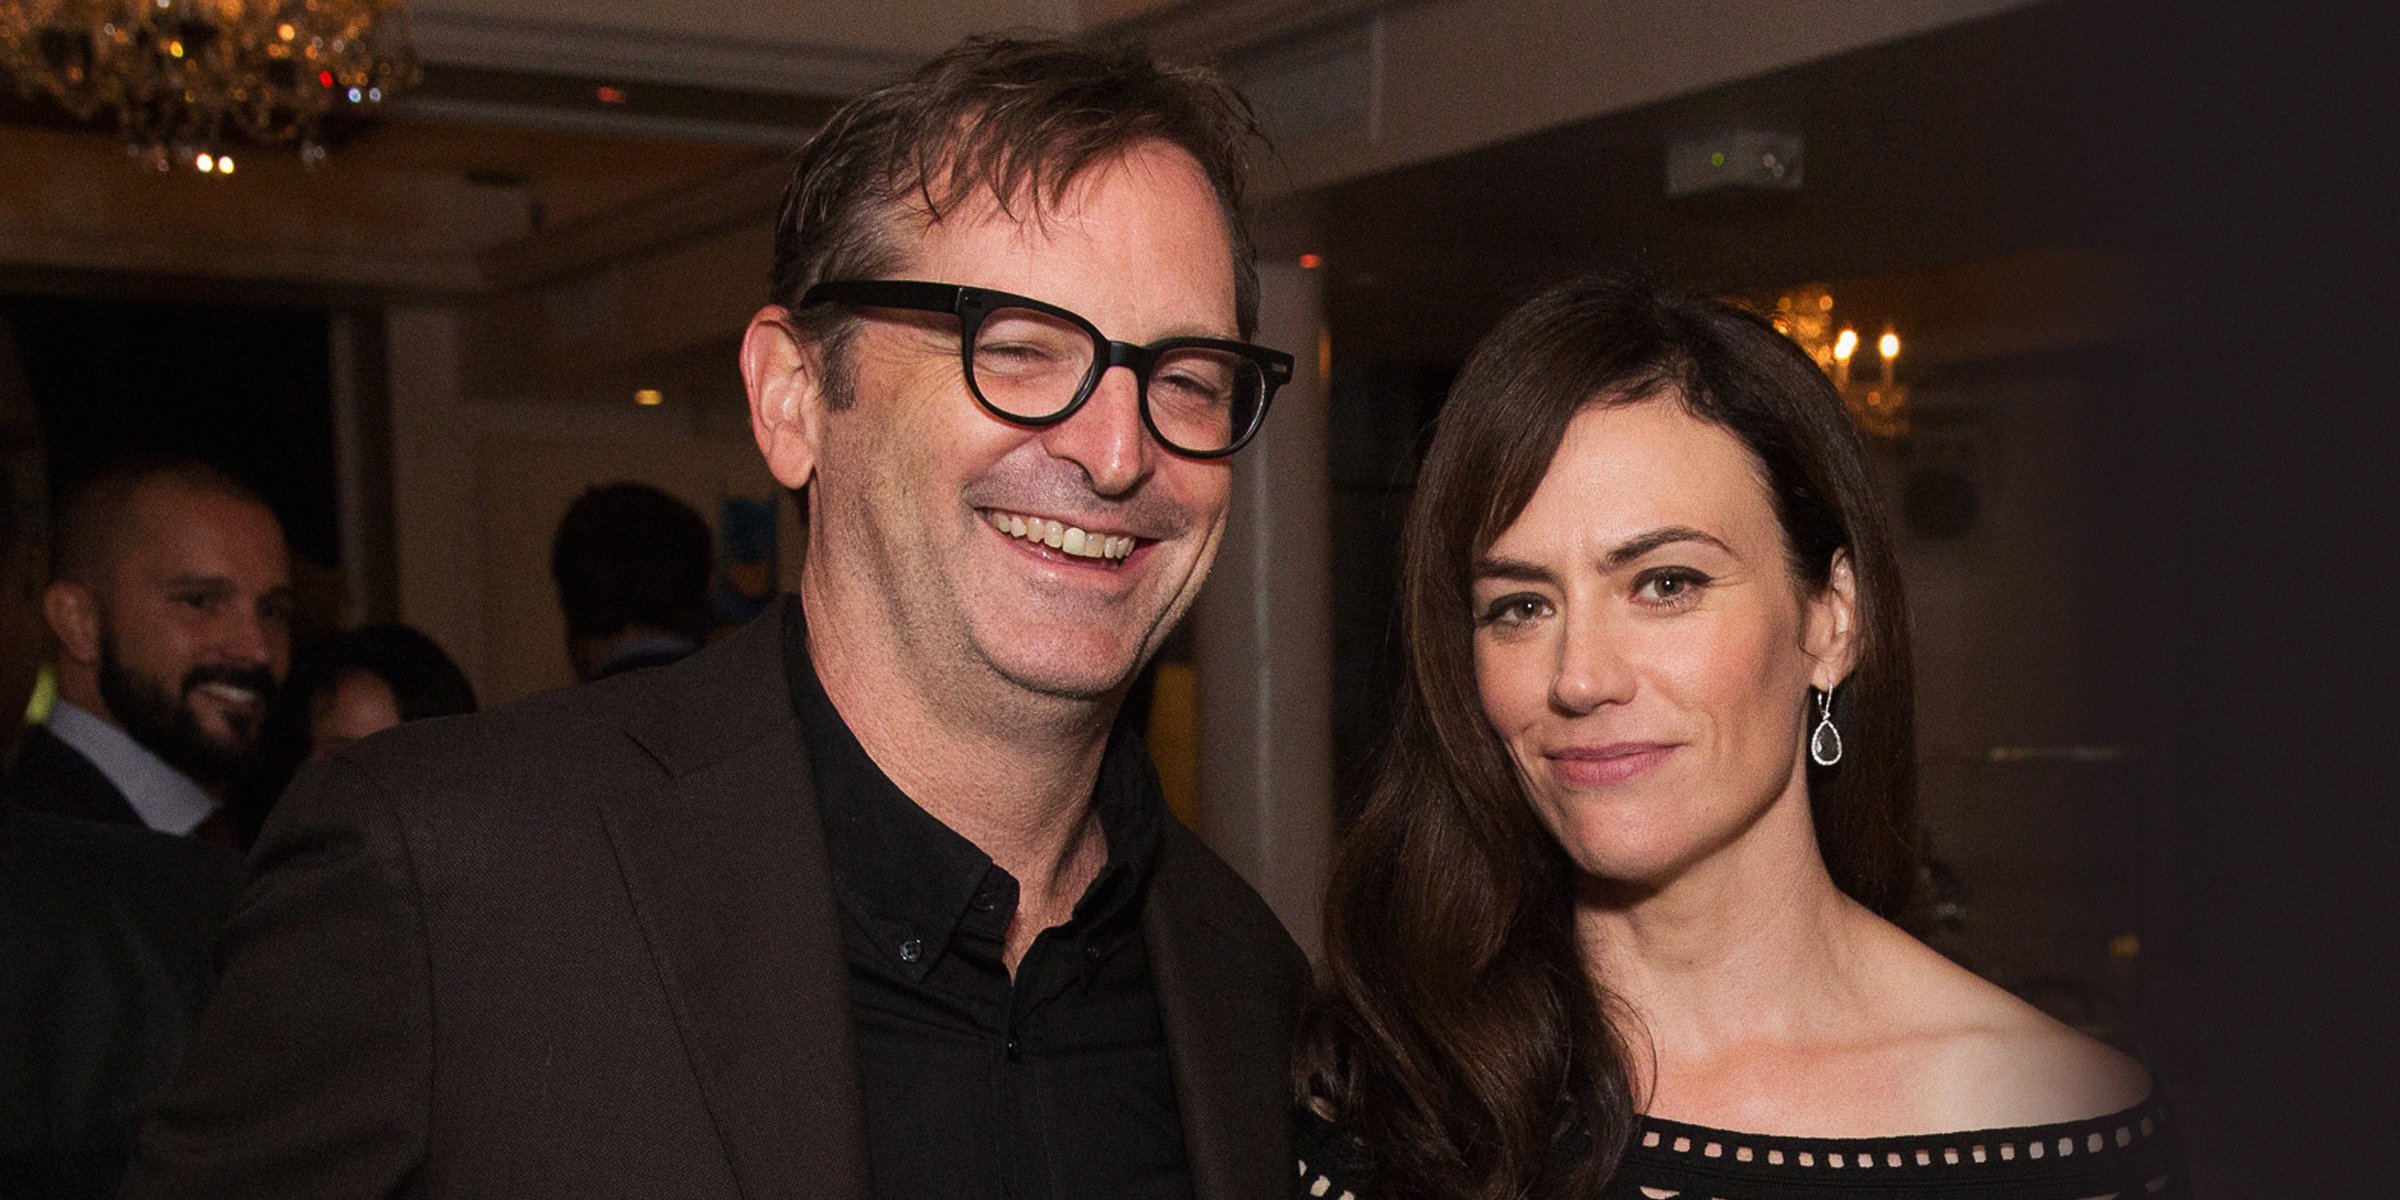 Paul Ratliff and Maggie Siff. | Source: Getty Images